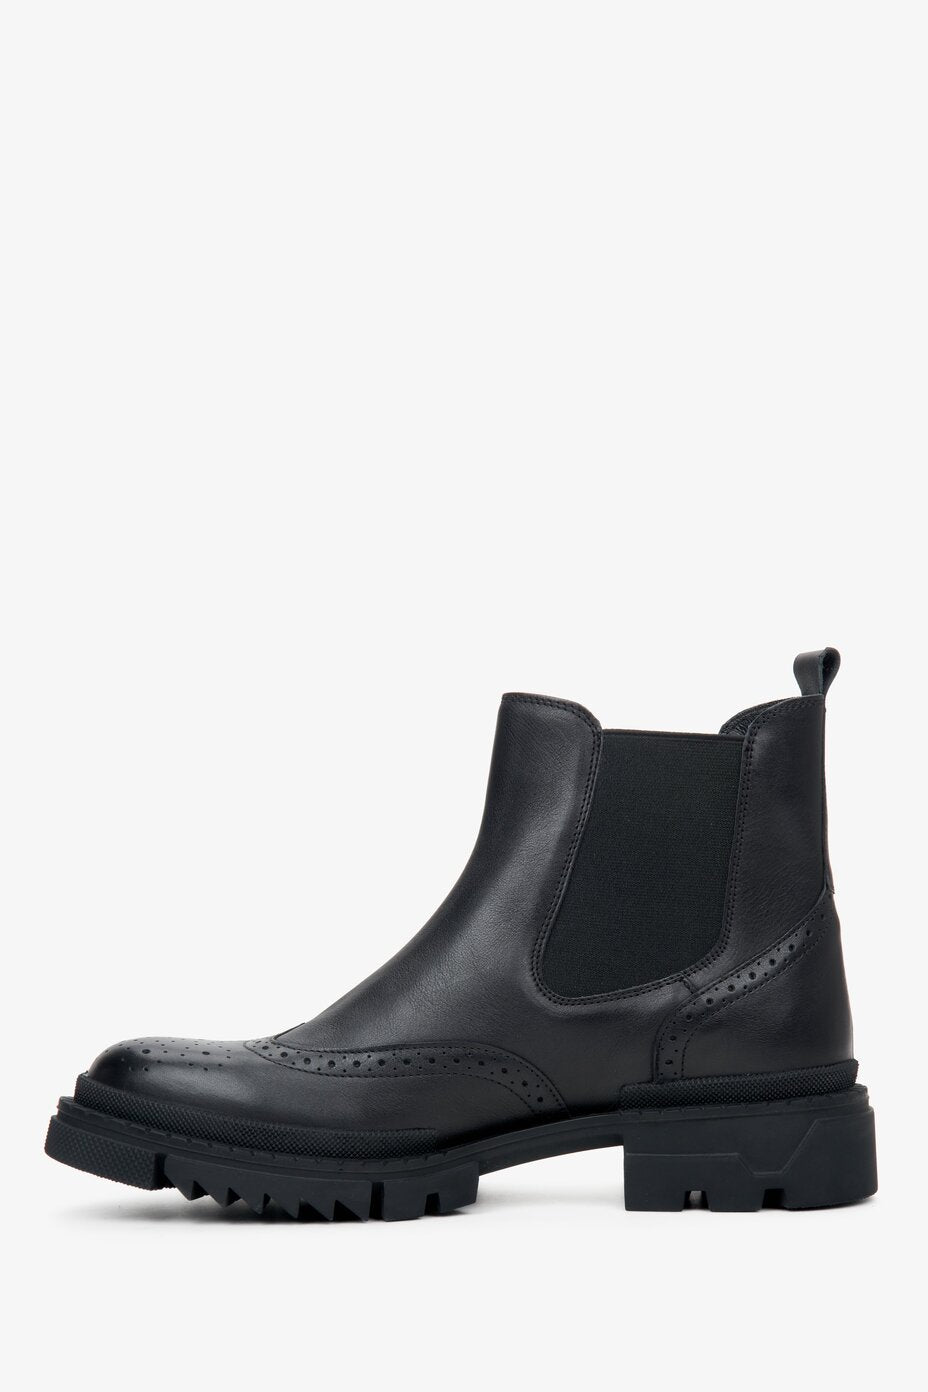 Men's black ankle boots made of genuine leather by Estro.